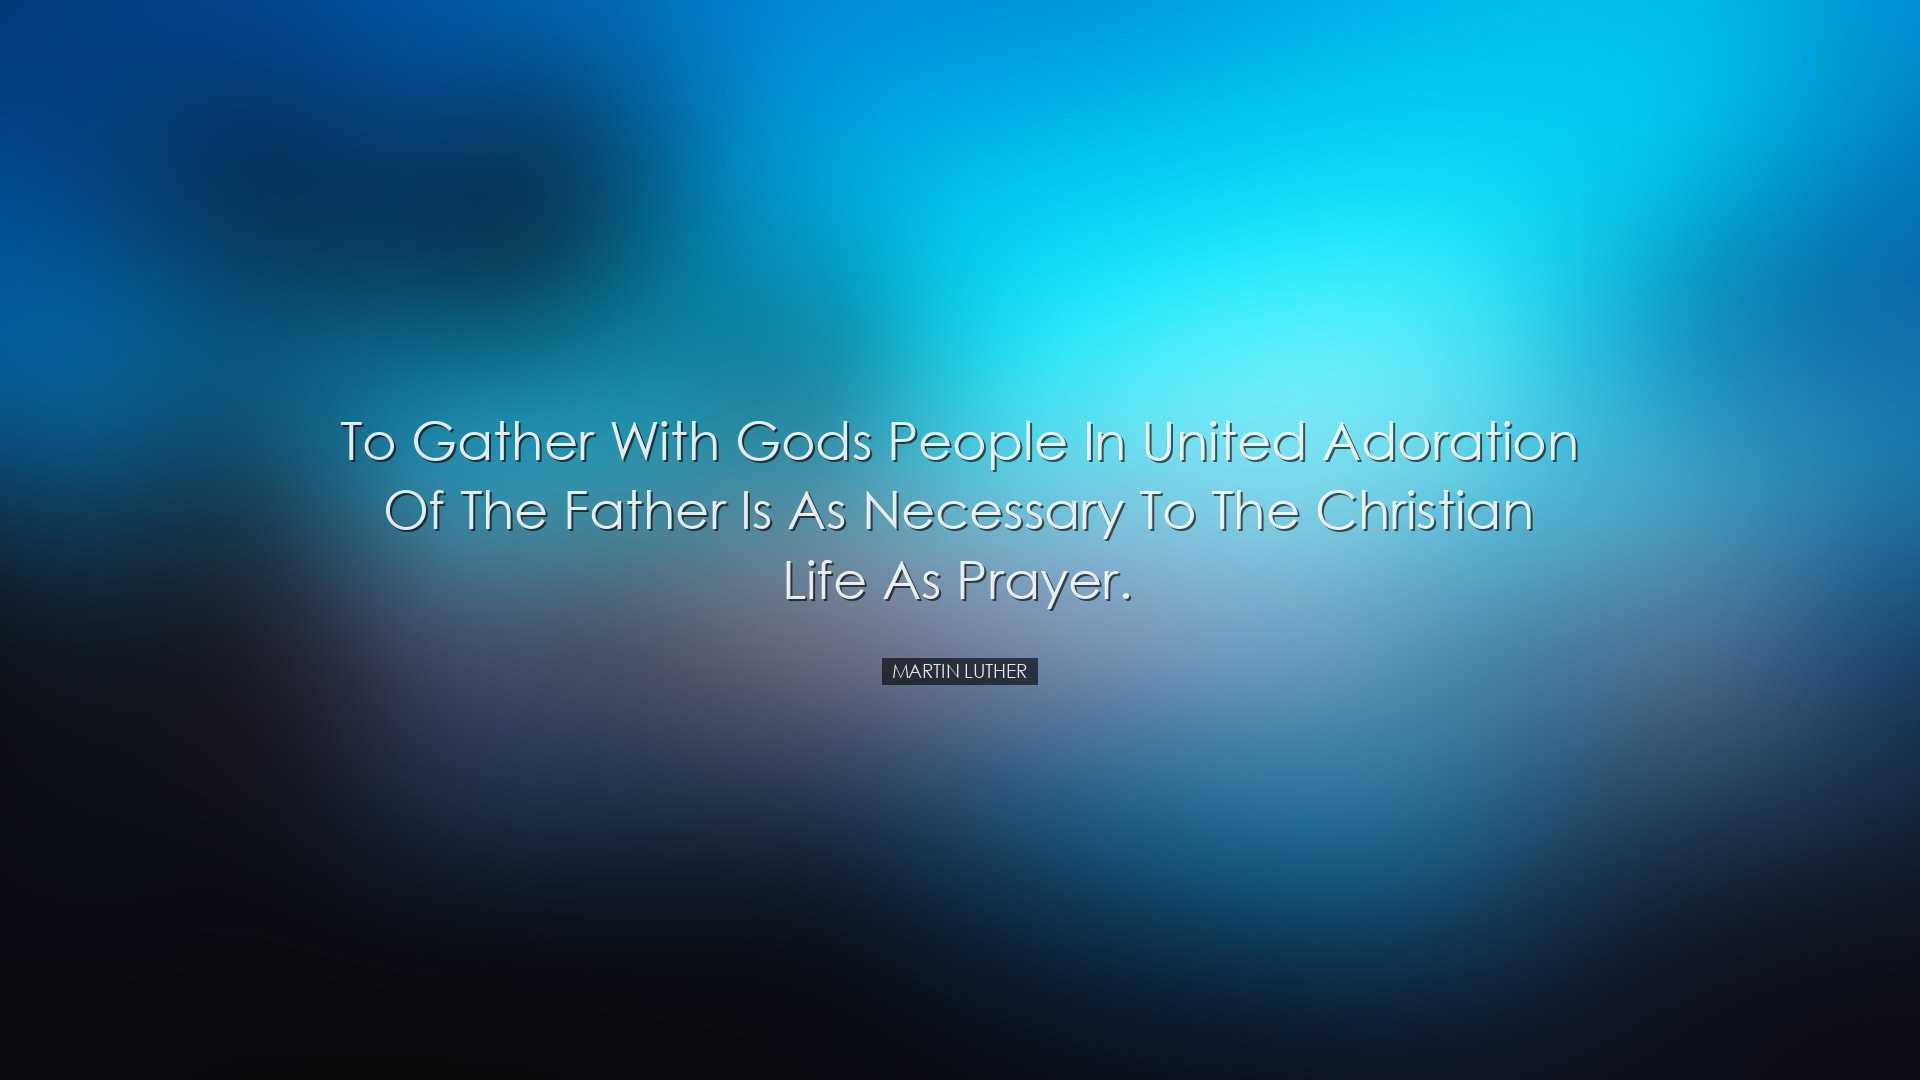 To gather with Gods people in united adoration of the Father is as